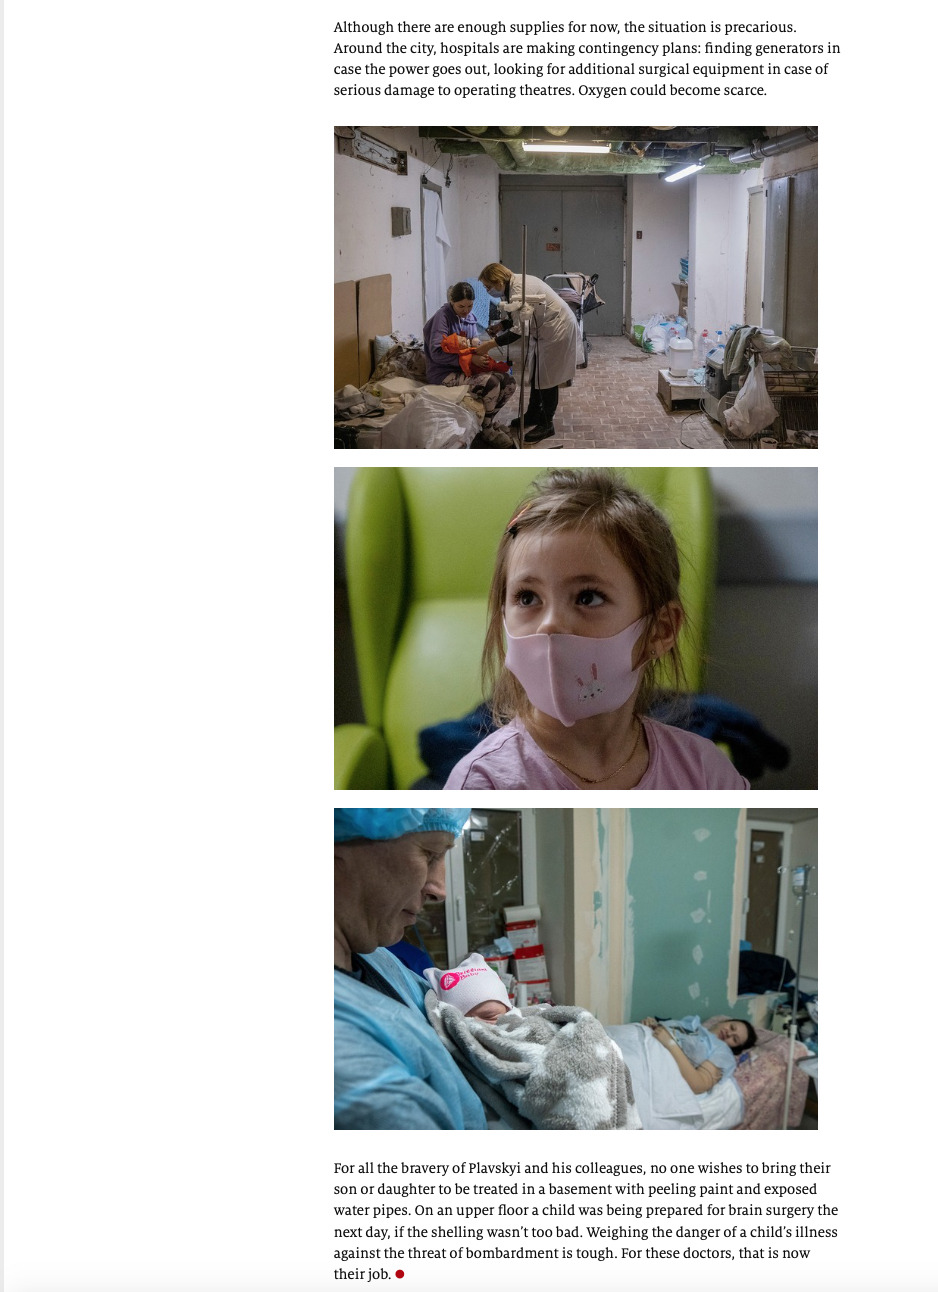 Photos by Ron Haviv / VII of doctors and nurses taking care of mothers and children in the basement shelter of the Ohmatdyt Children’s Hospital in Kyiv during the Russian invasion of Ukraine, in The Economist 1843 Magazine, March 3, 2022.